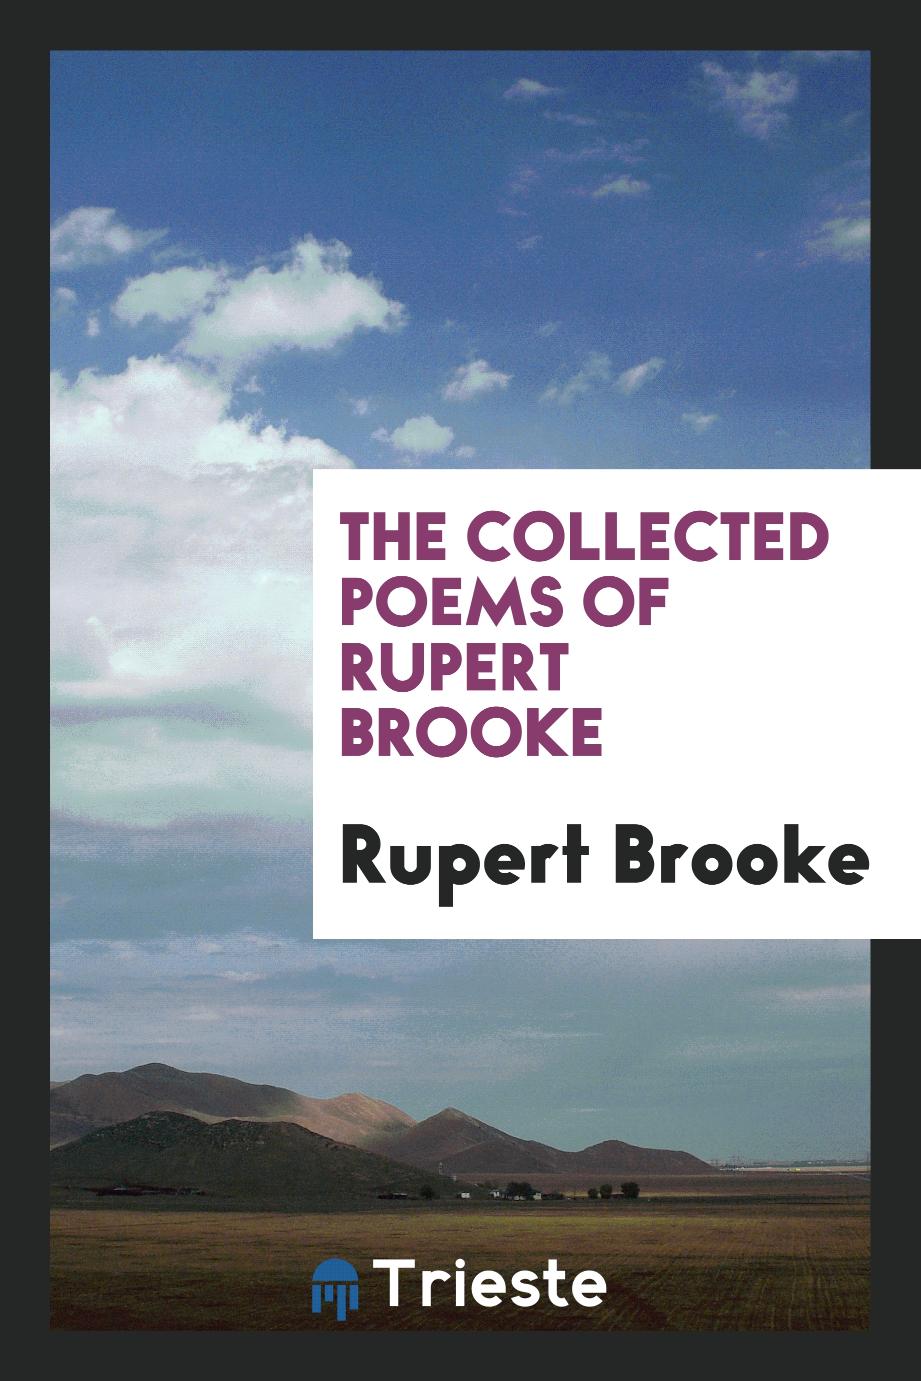 The collected poems of Rupert Brooke